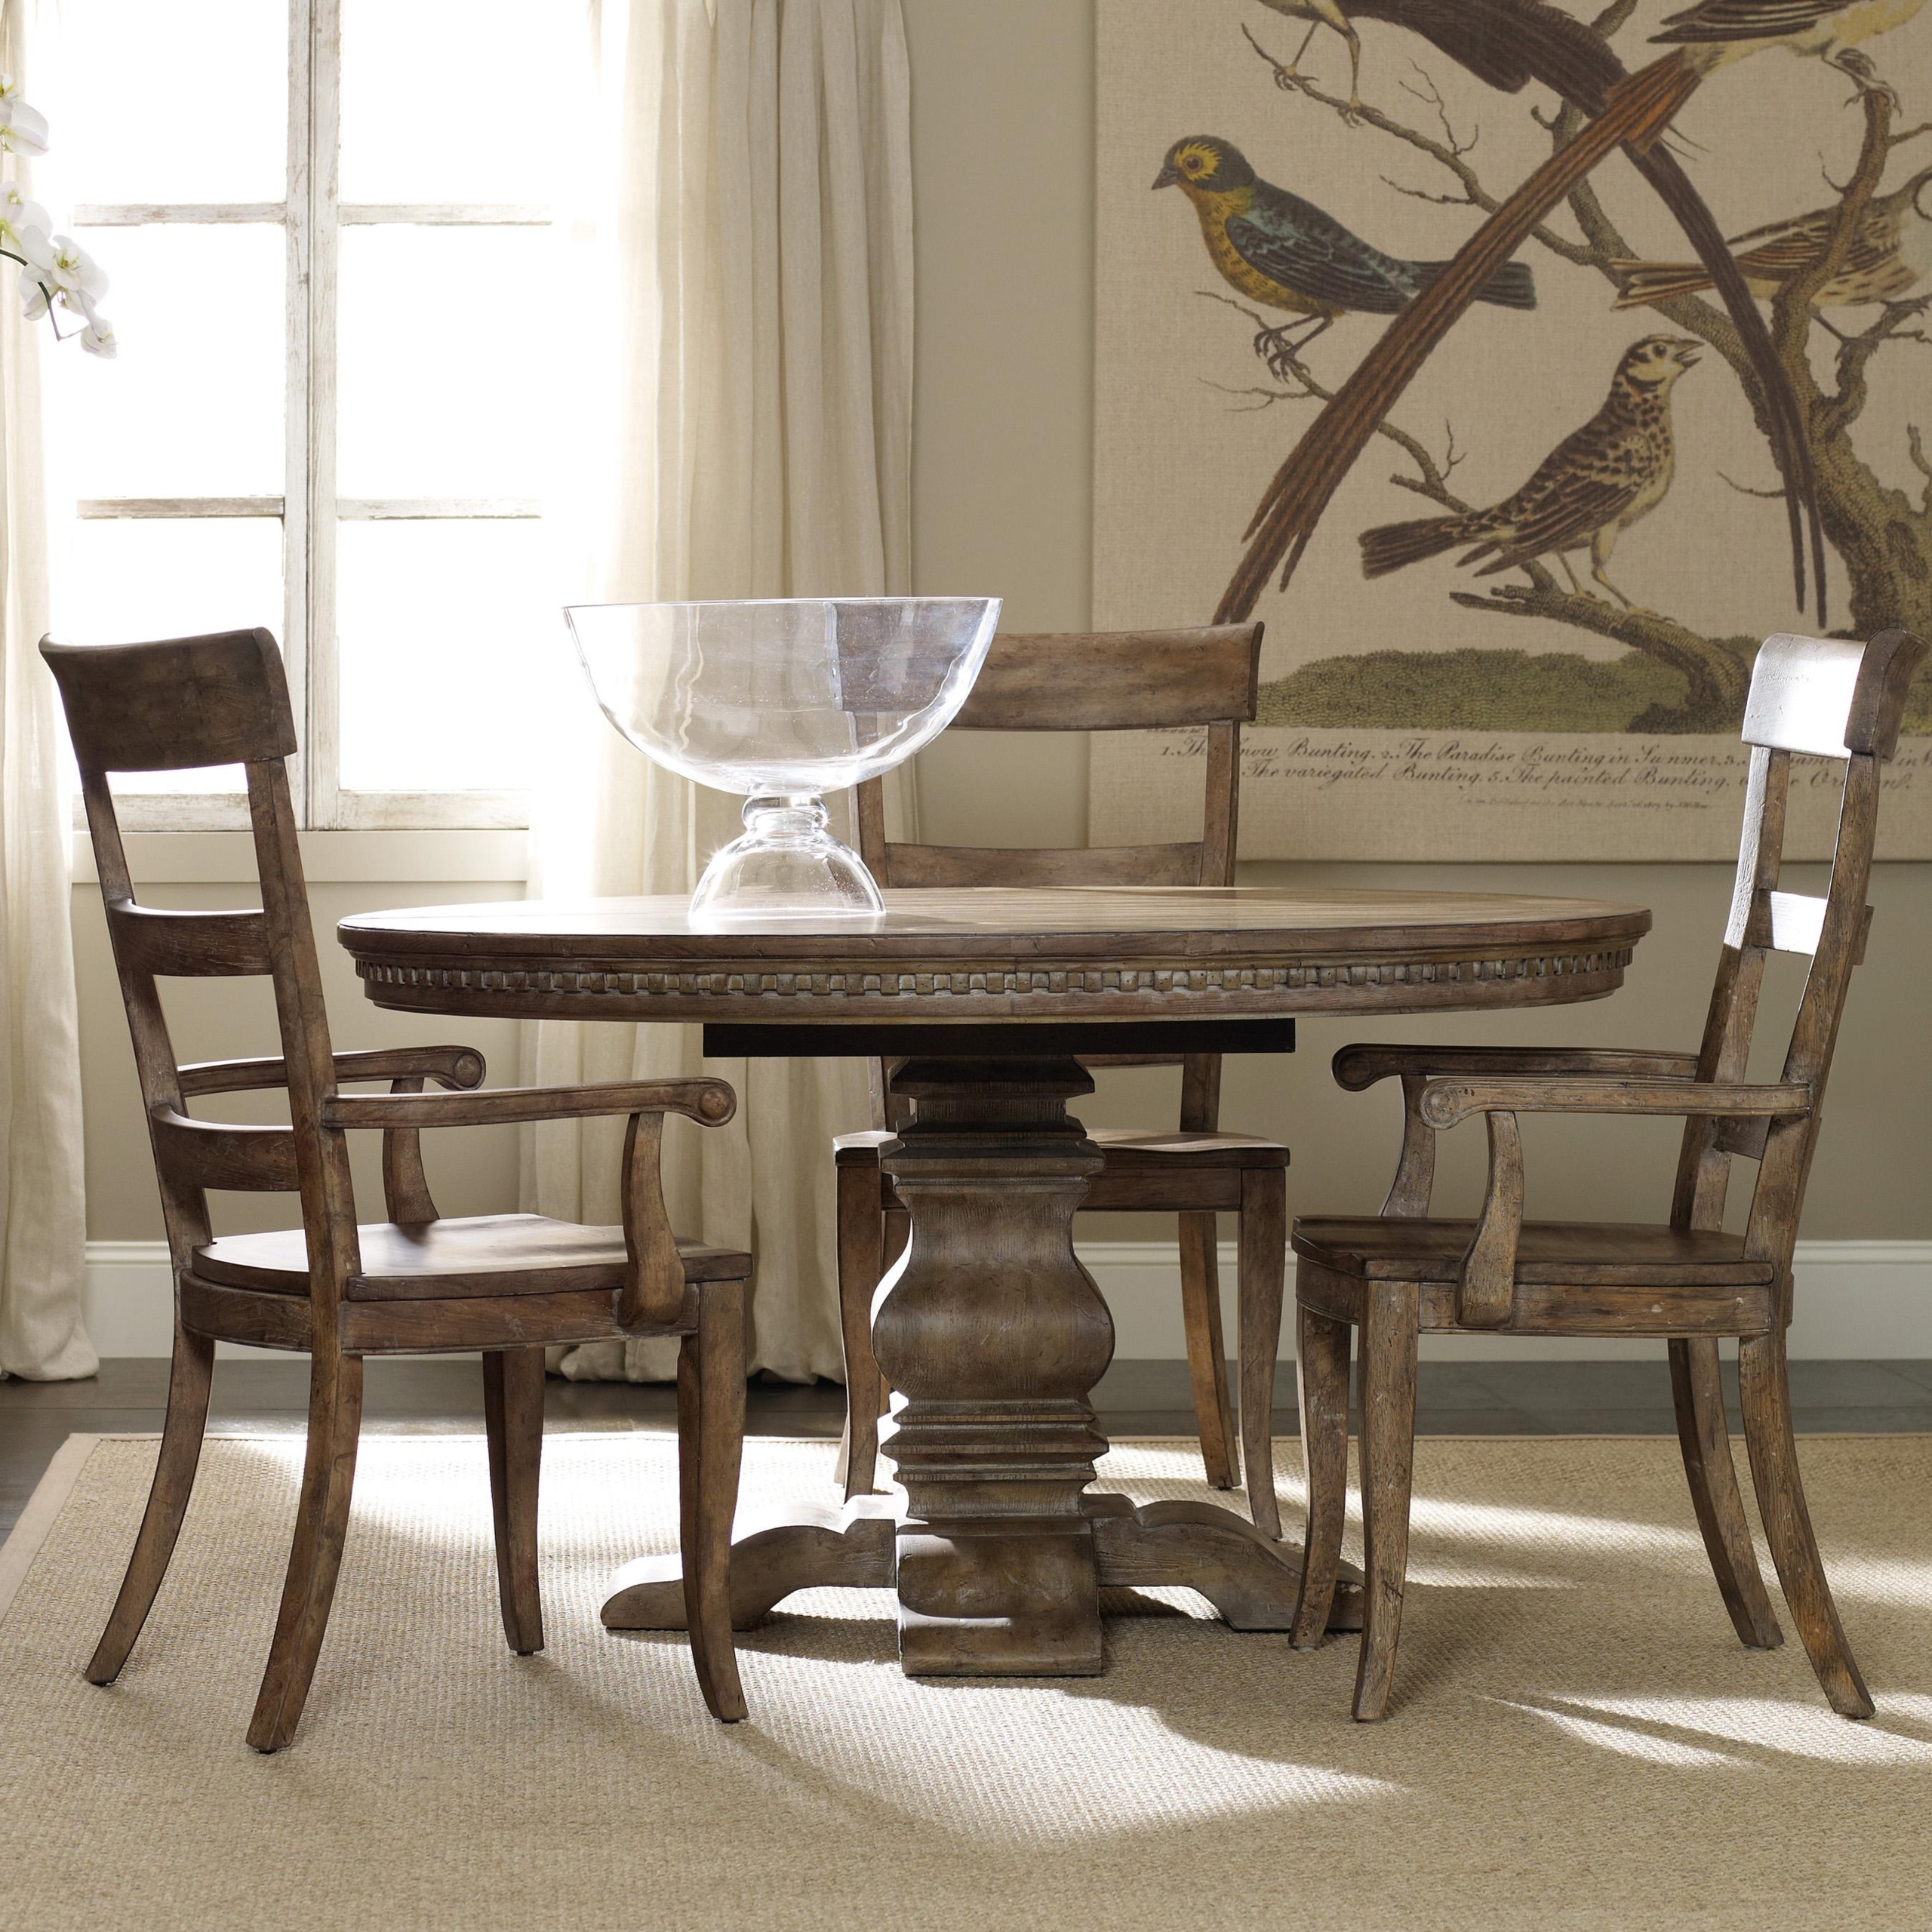 Oval dining table with leaf